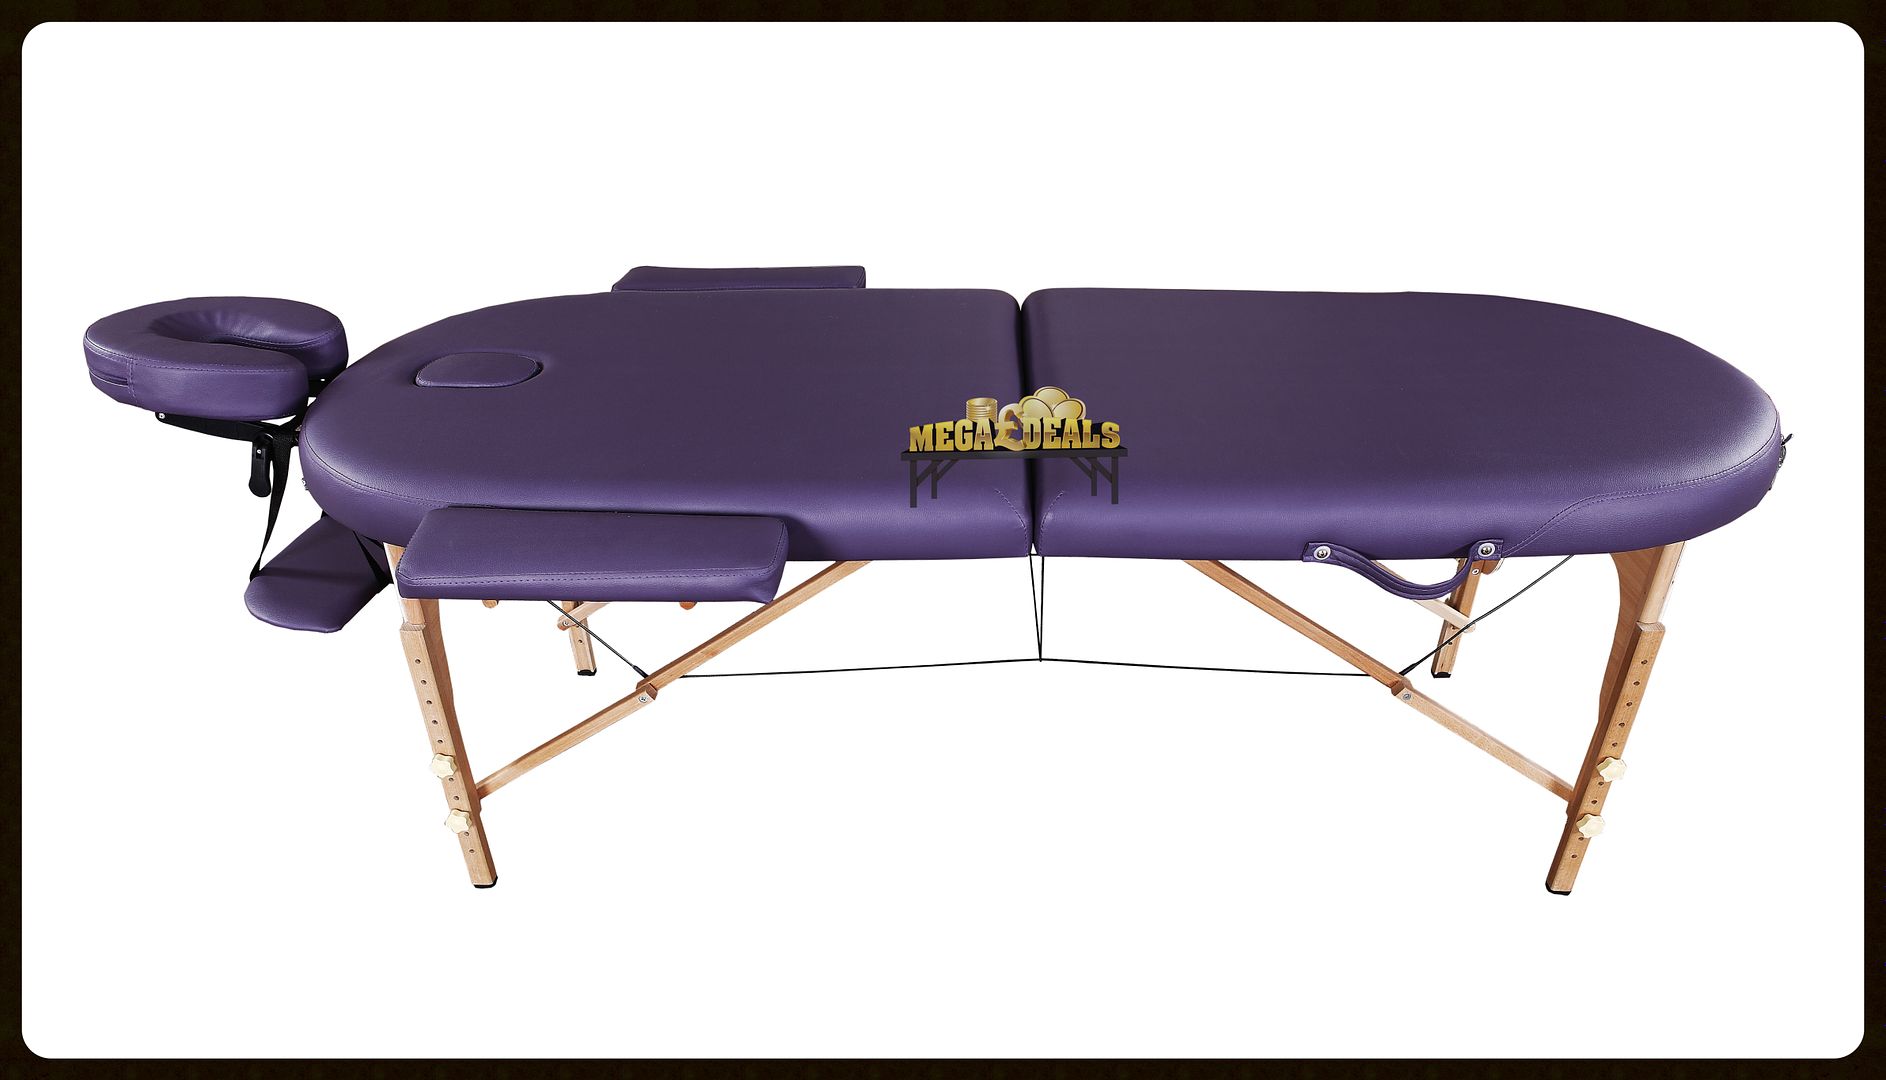 Purple Orvis Portable Massage Table Couch Beauty Therapy Bed Reiki 3 Spa 0905